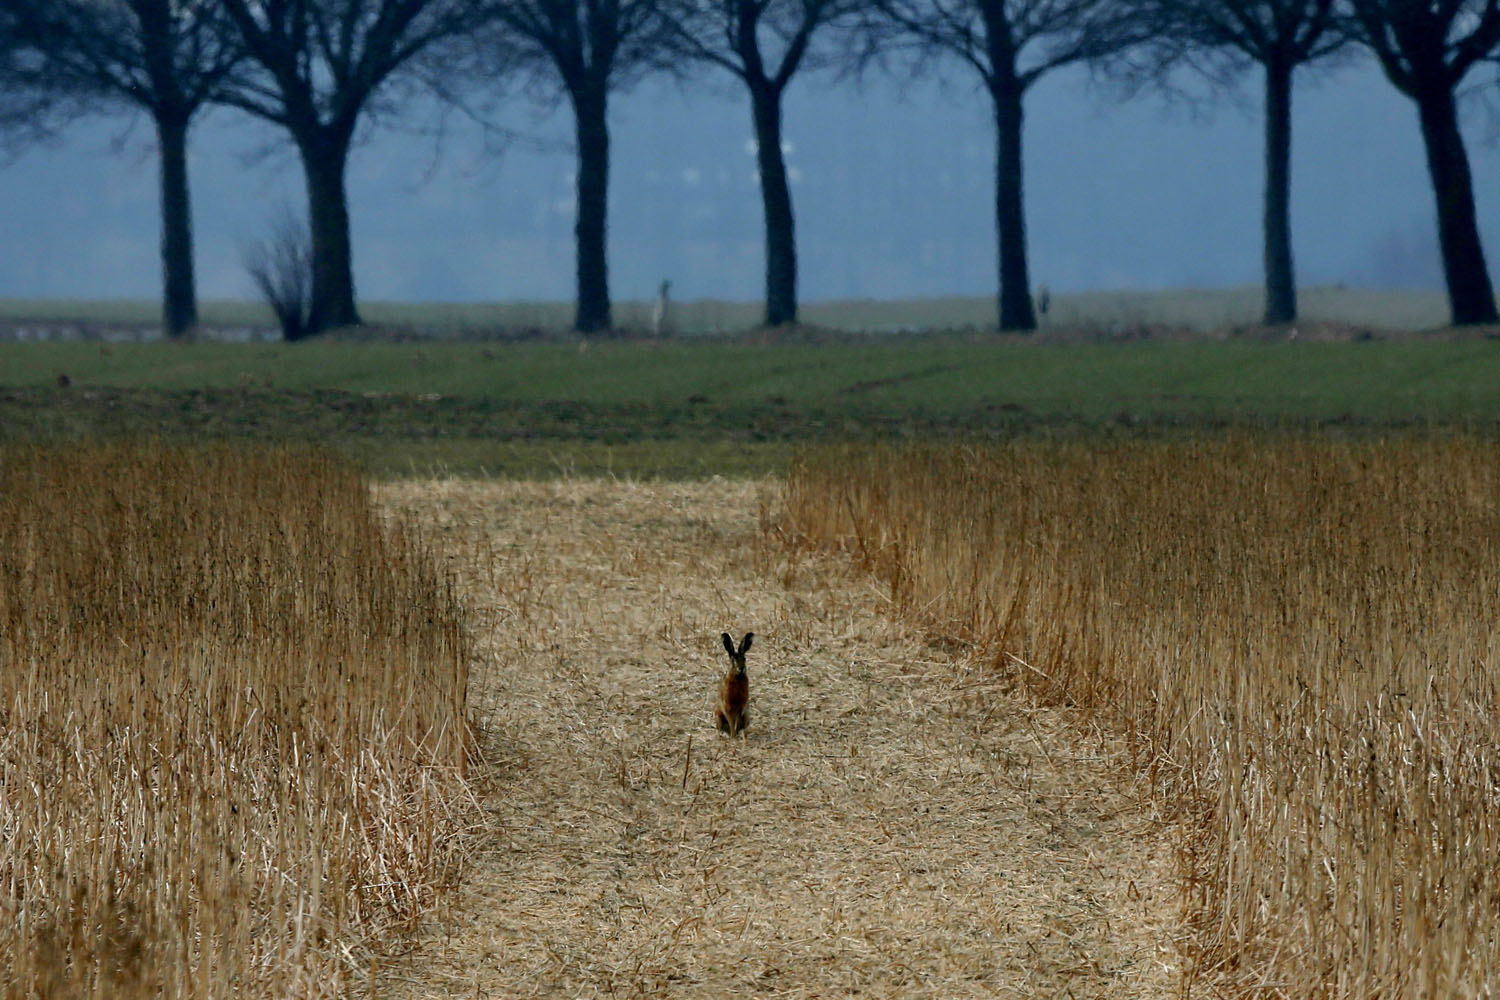 March 28, 2013. A hare rests in a field in Duisburg, western Germany. Kids in Germany are made believe that hares traditionally deliver the Easter eggs.